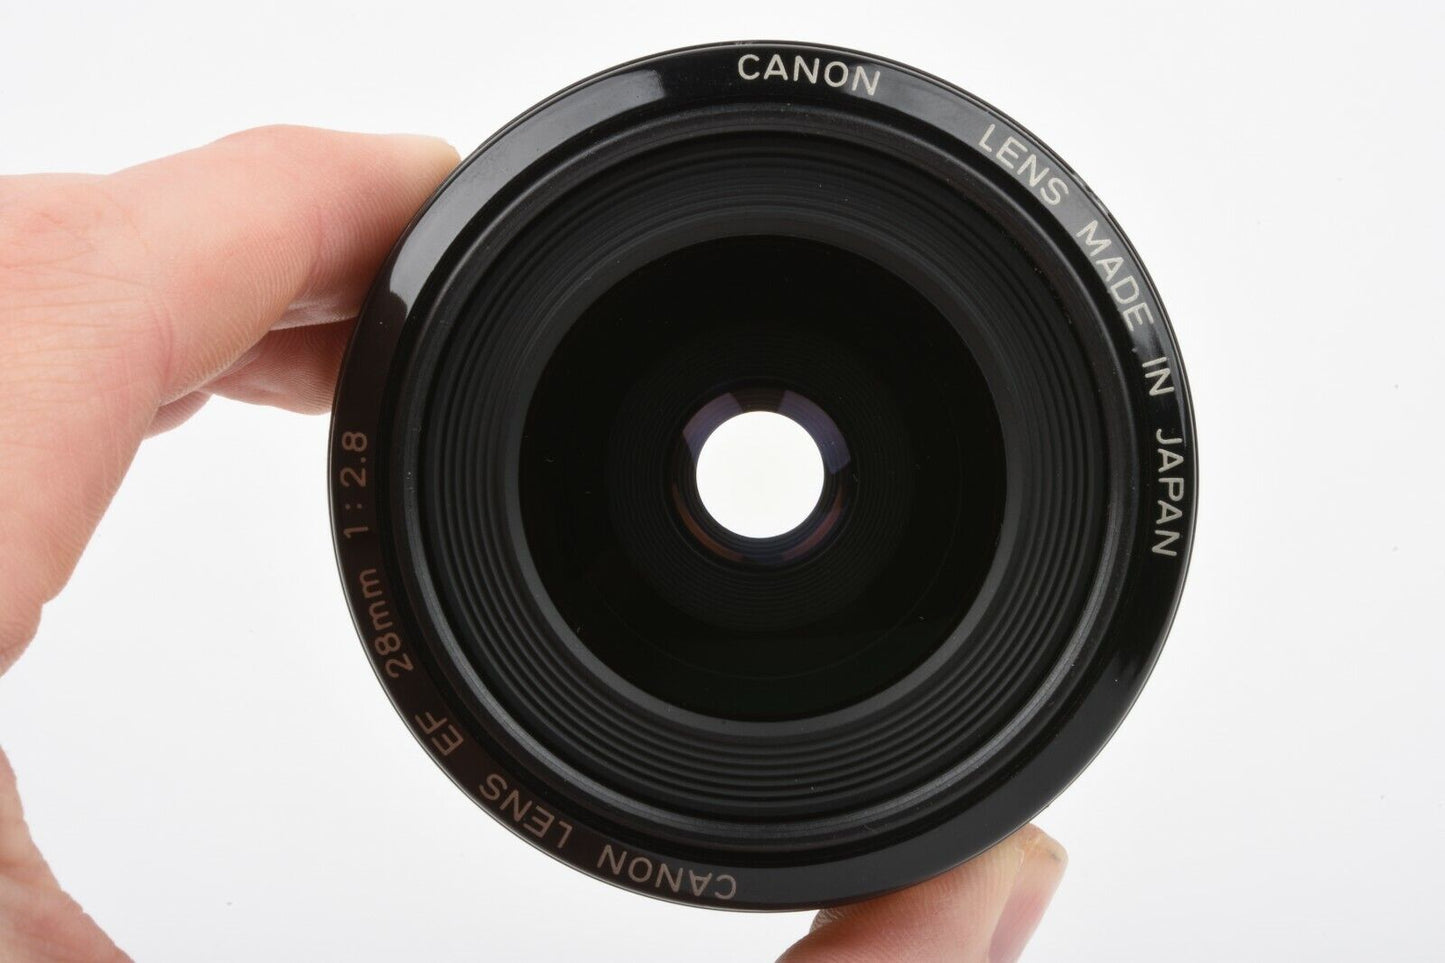 MINT- CANON EF 28mm f2.8 WIDE ANGLE AF LENS, VERY CLEAN AND SHARP, CAPS